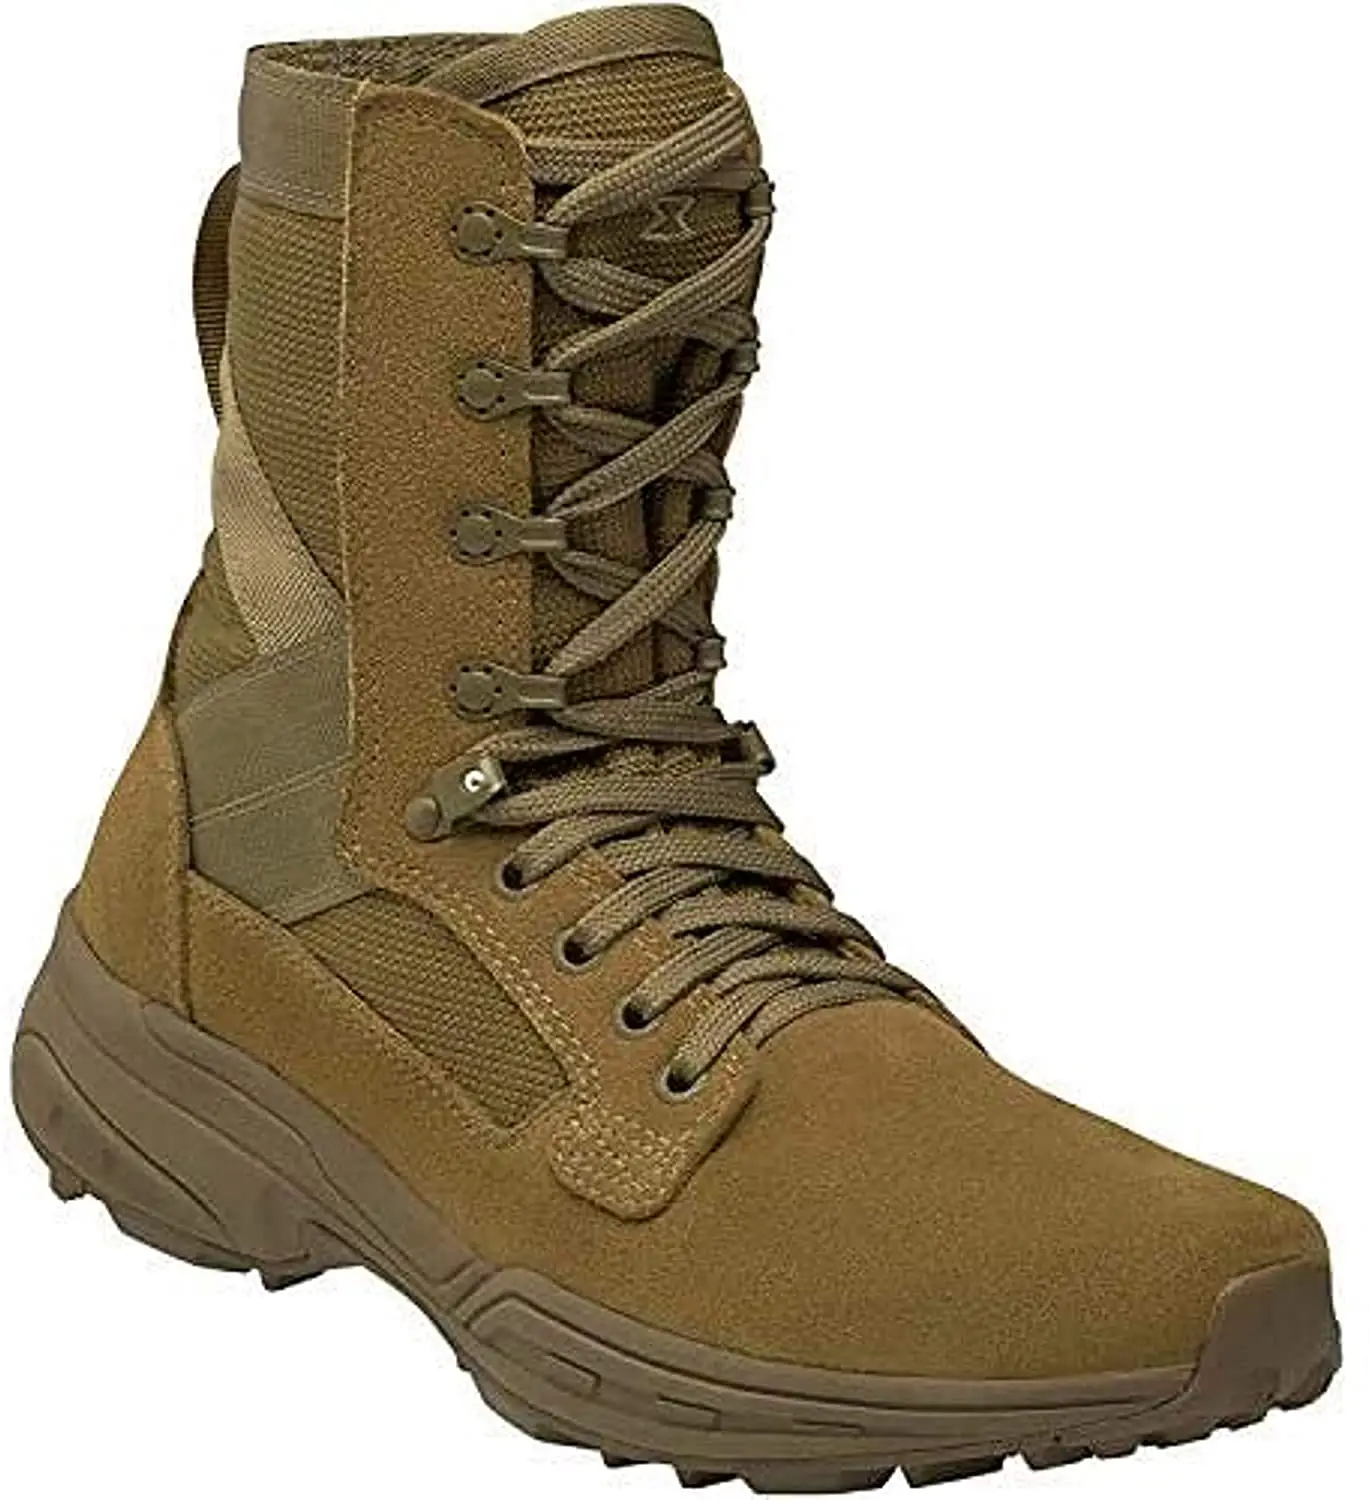 Garmont T8 tactical boots